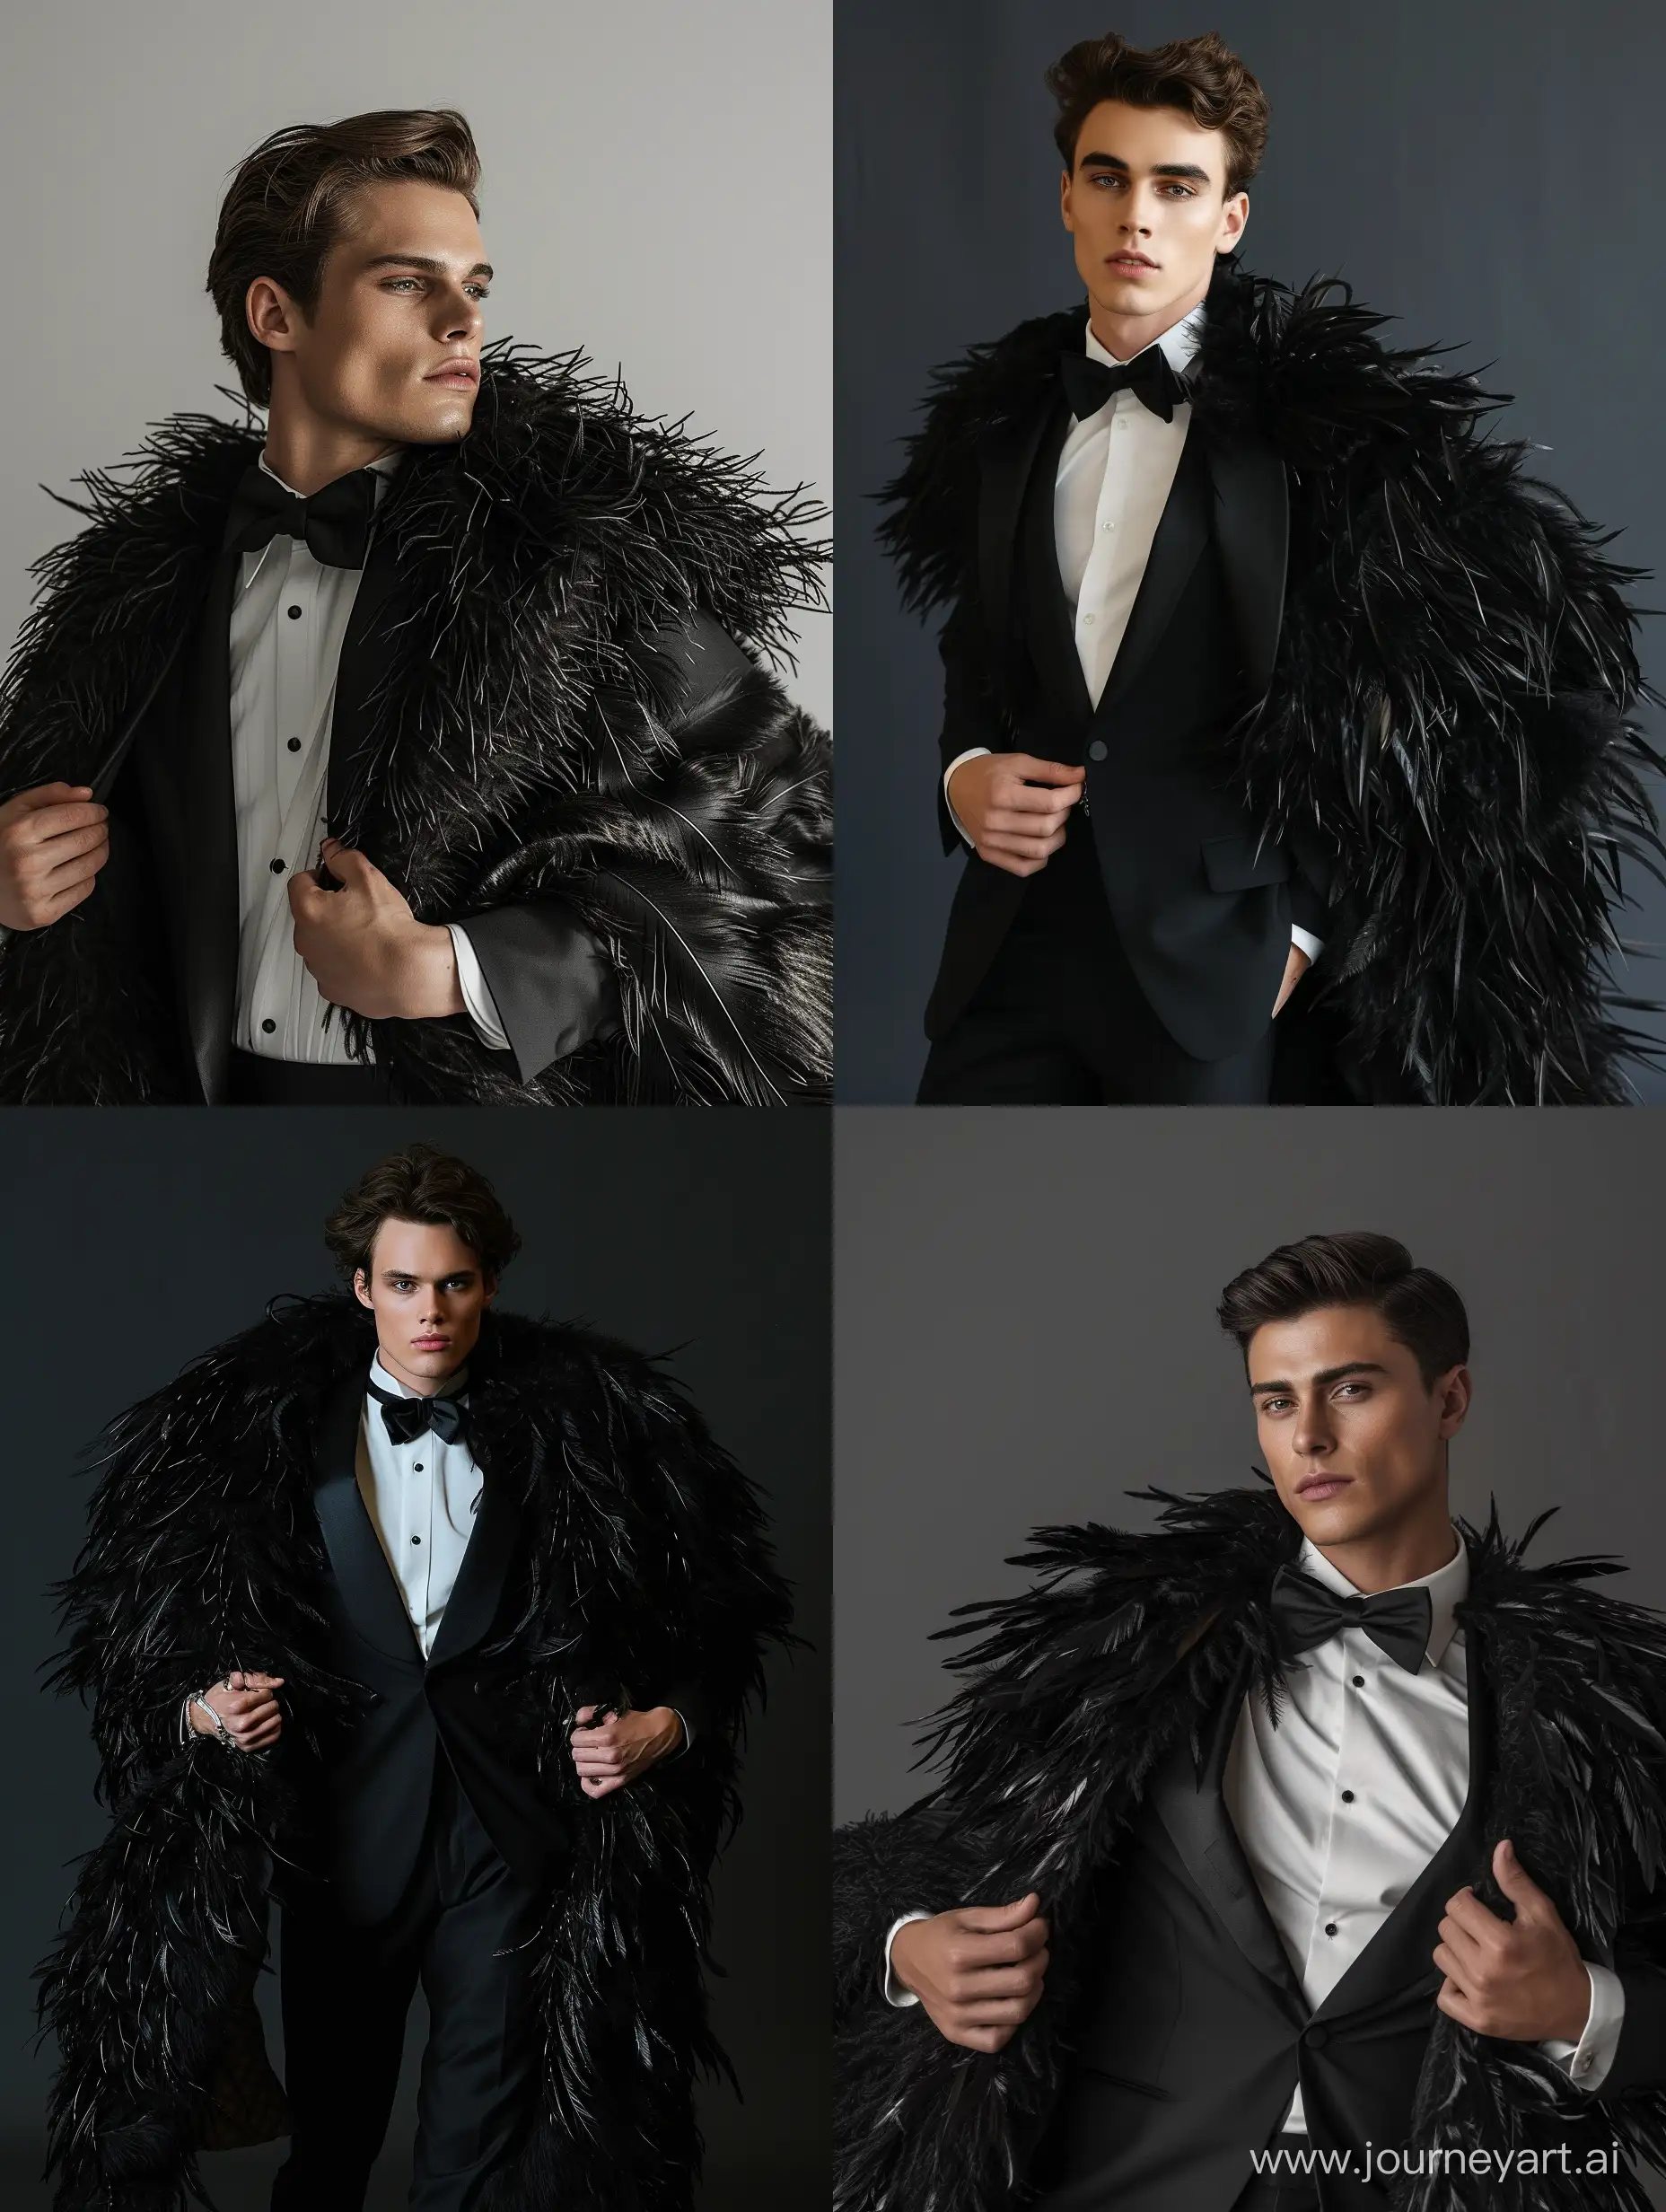 Cool, fantastic, a hyper-realistic photo a luxury 20 y.o guy in a black tuxedo and a fur coat made of black ostrich feathers, in Old Hollywood style, dynamics of angle, posture, effect of movement